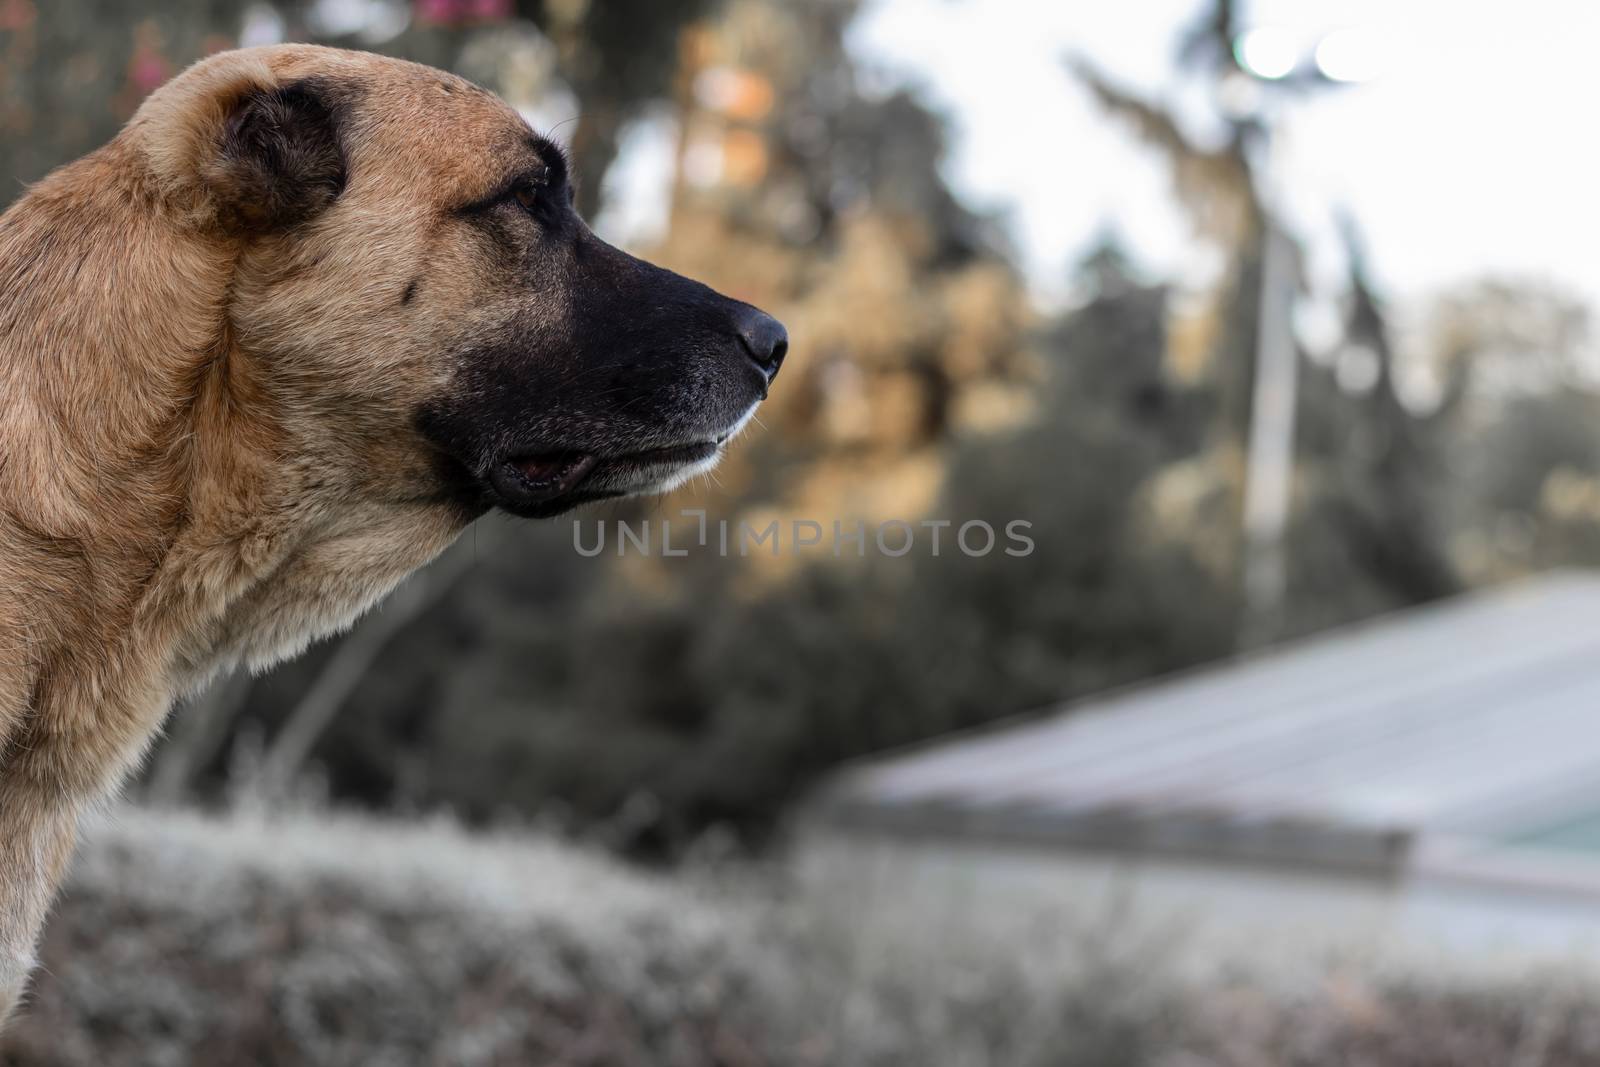 very good looking portrait shoot to a stray dog - orange fur and blurry background. photo has taken at izmir/turkey.